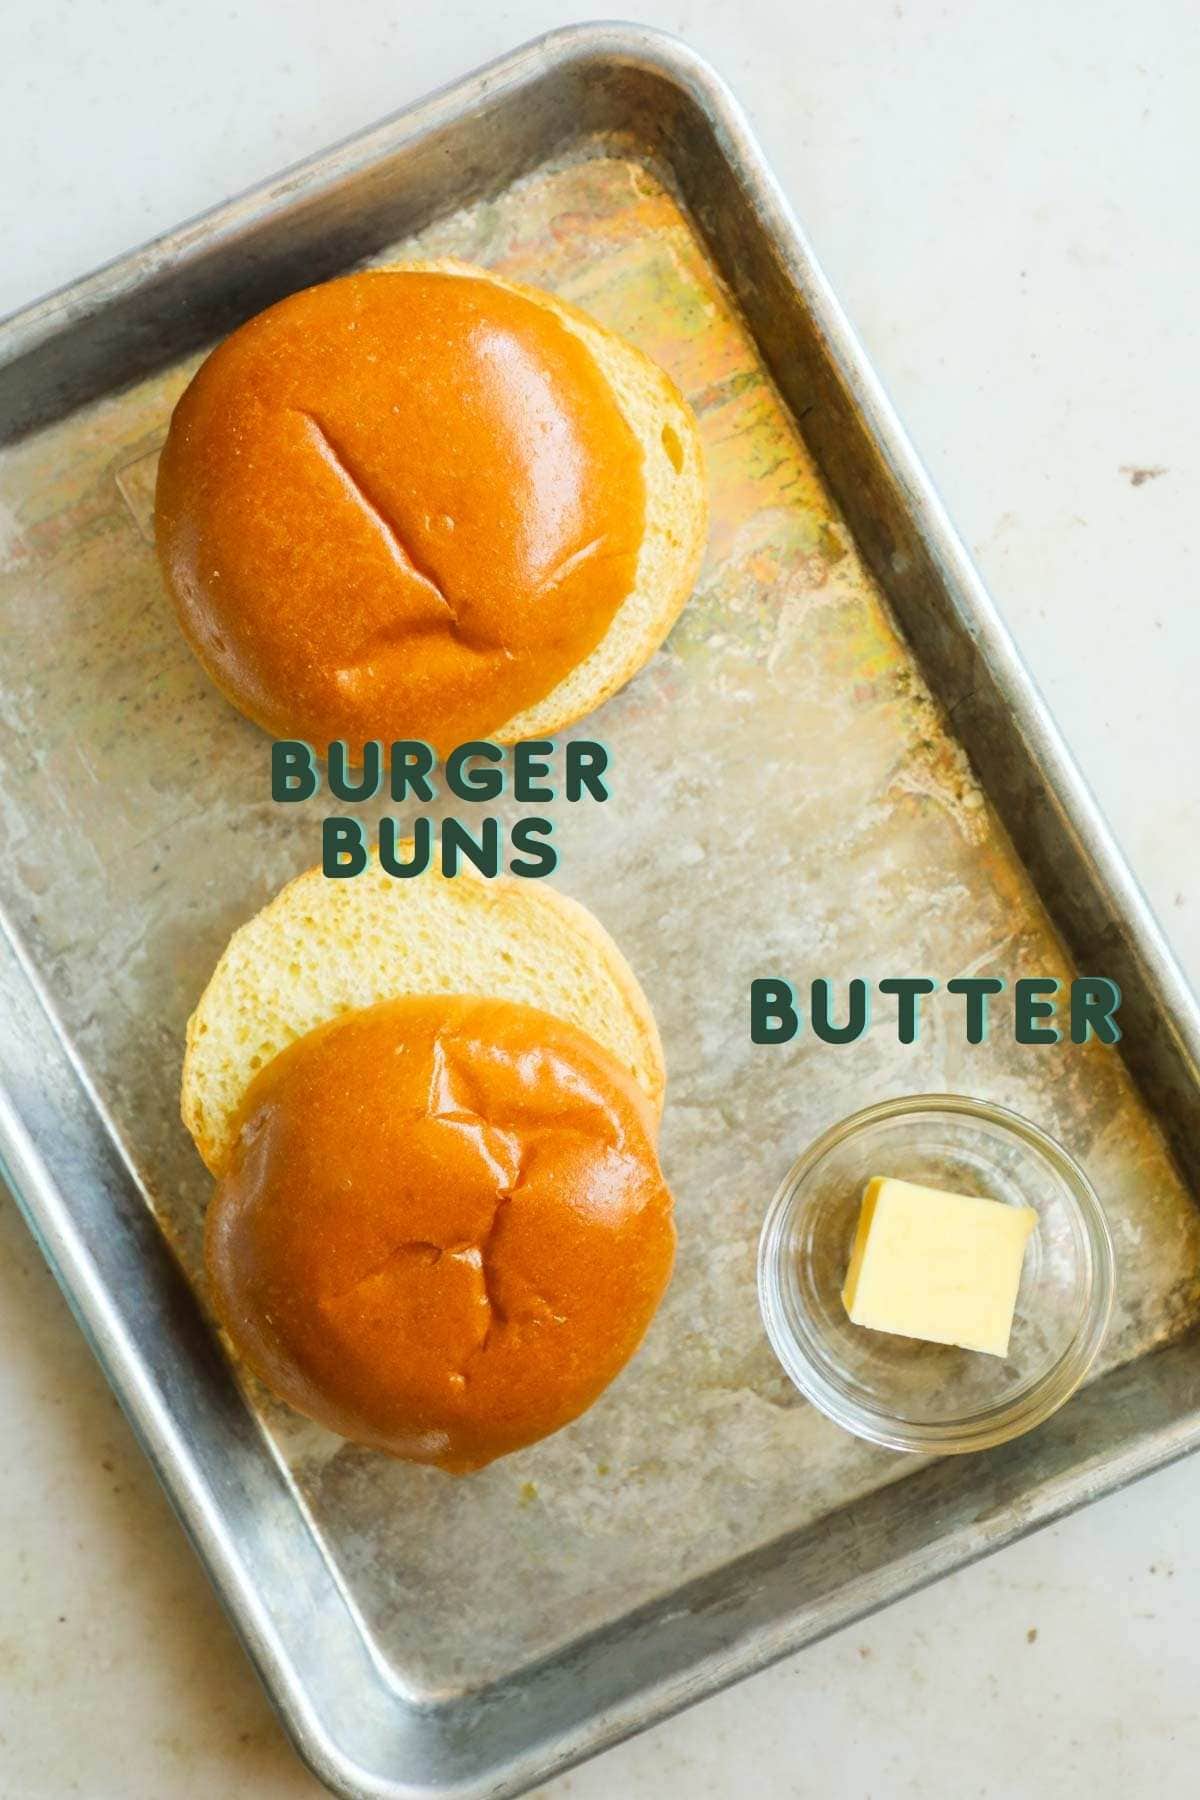 Ingredients to make toasted burger buns, including burger buns and butter.